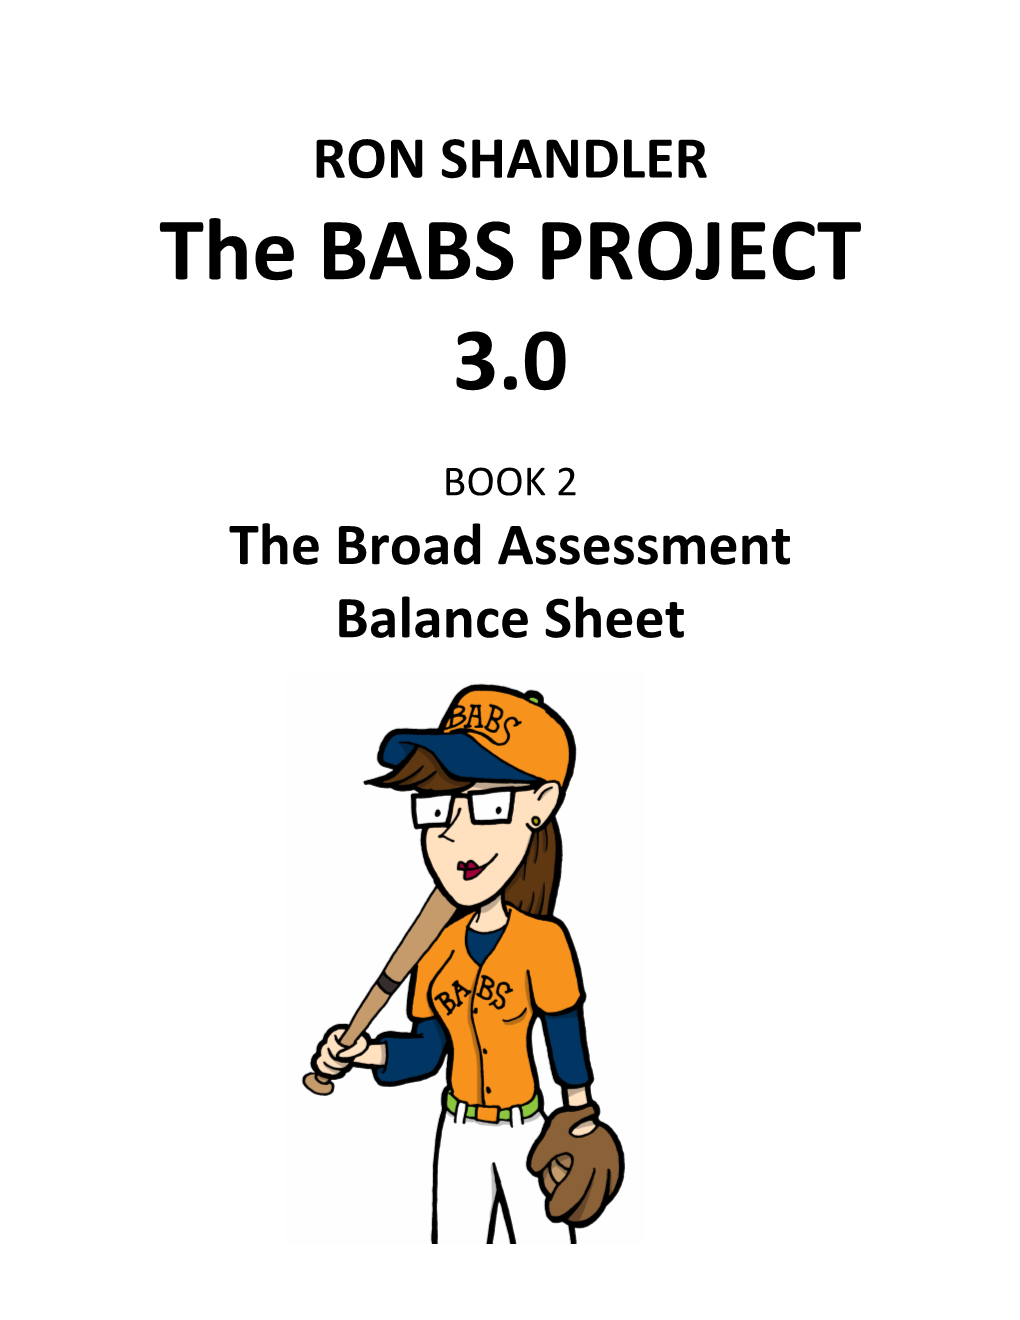 BABS Project Book 2